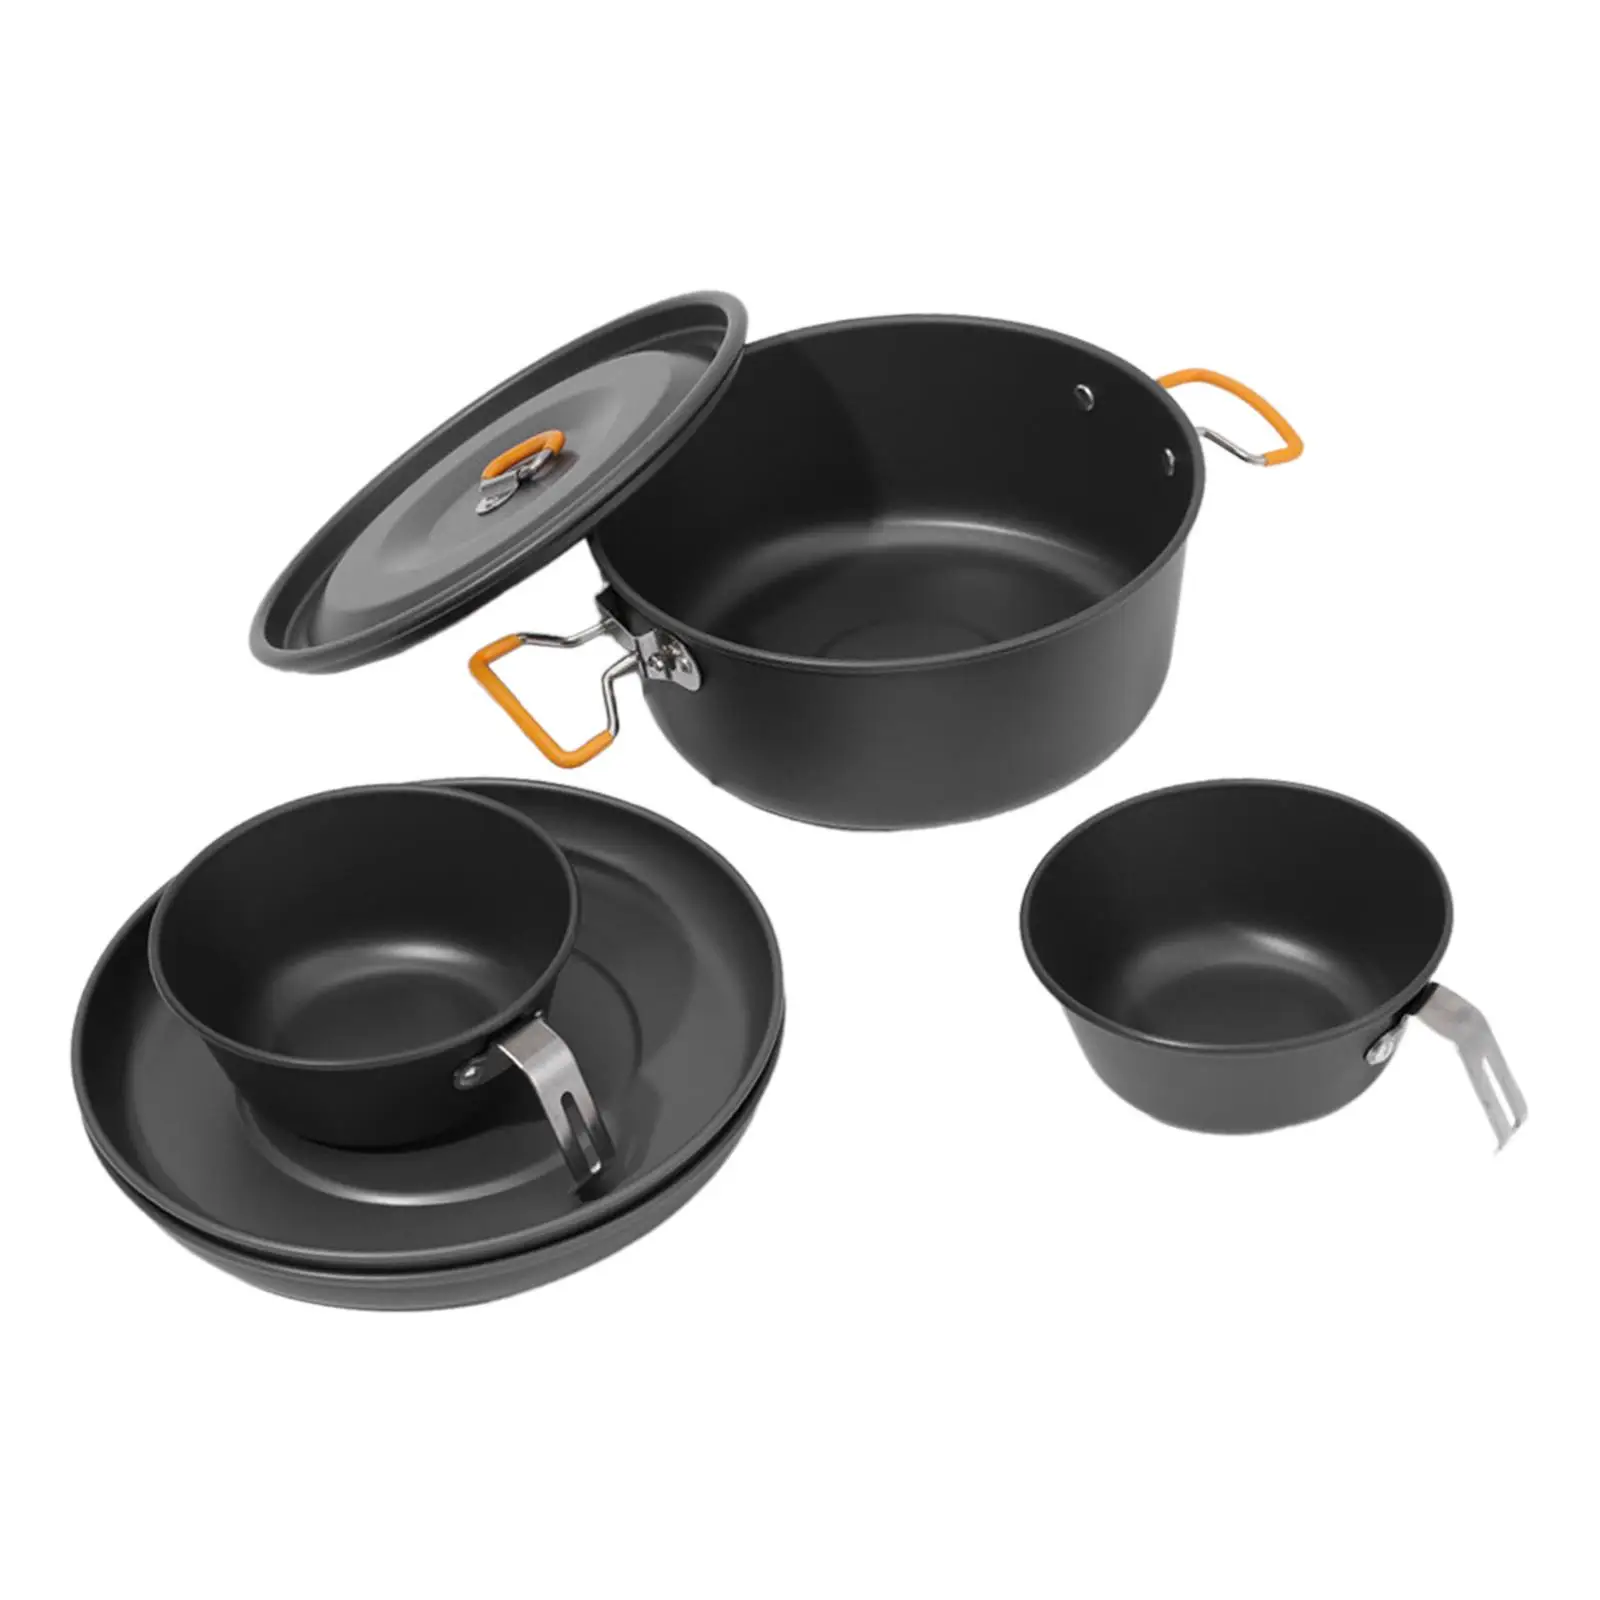 

Camping Cookware Set Cookware with Frying Pan and Bowls Utensils Hot Pot Cooking Pot for Backpacking Dinner Survival Outdoor BBQ